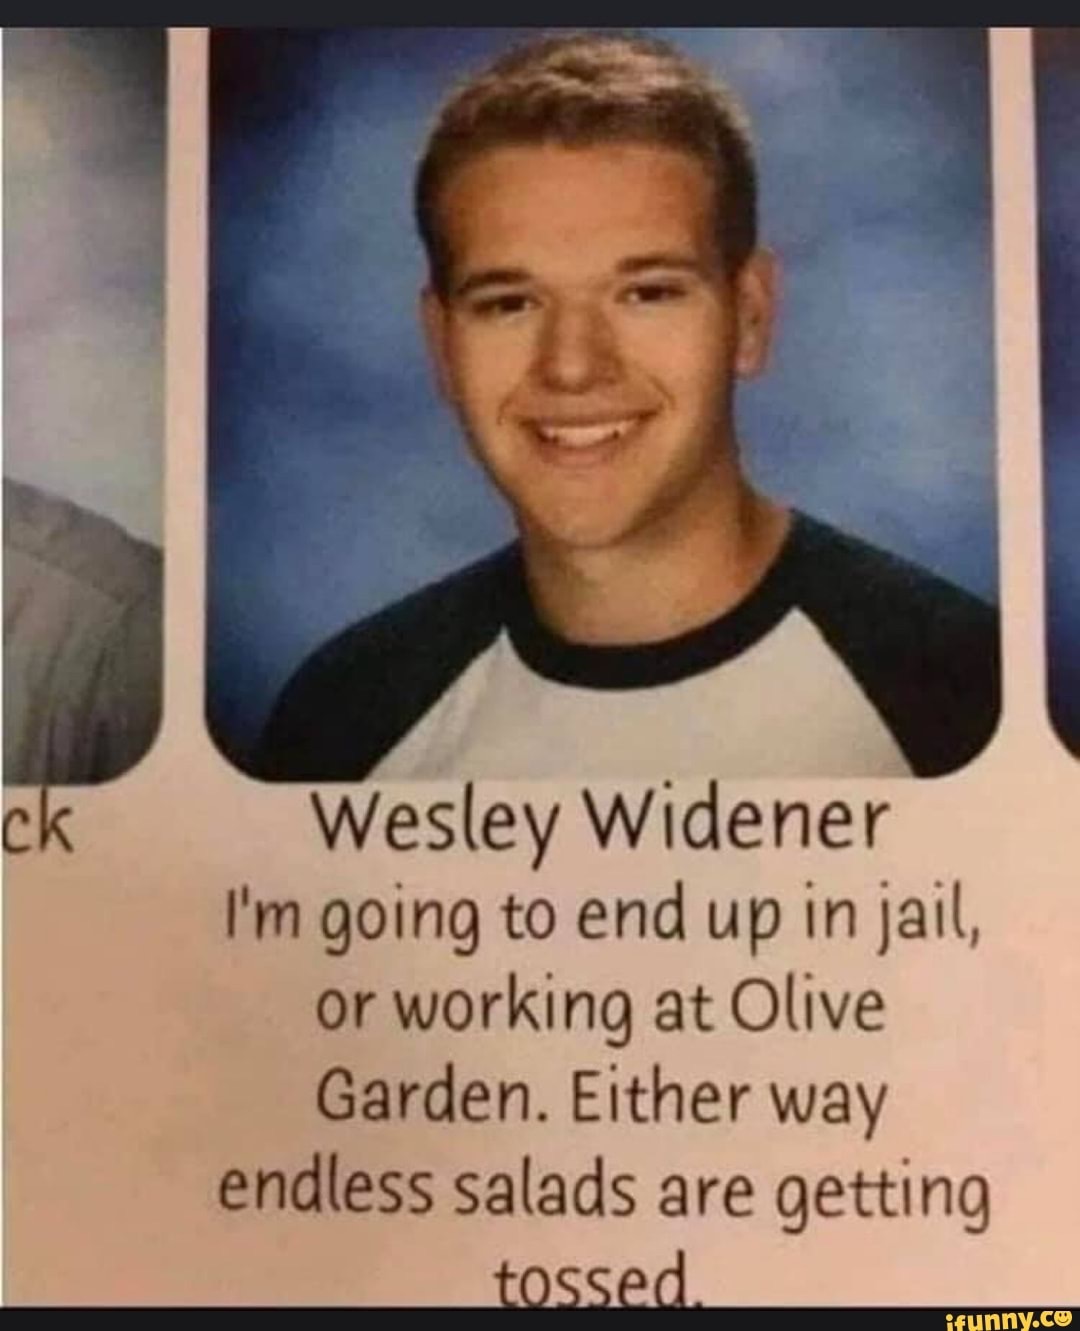 wesley widener - ck Wesley Widener I'm going to end up in jail, or working at Olive Garden. Either way endless salads are getting tossed ifunny.co